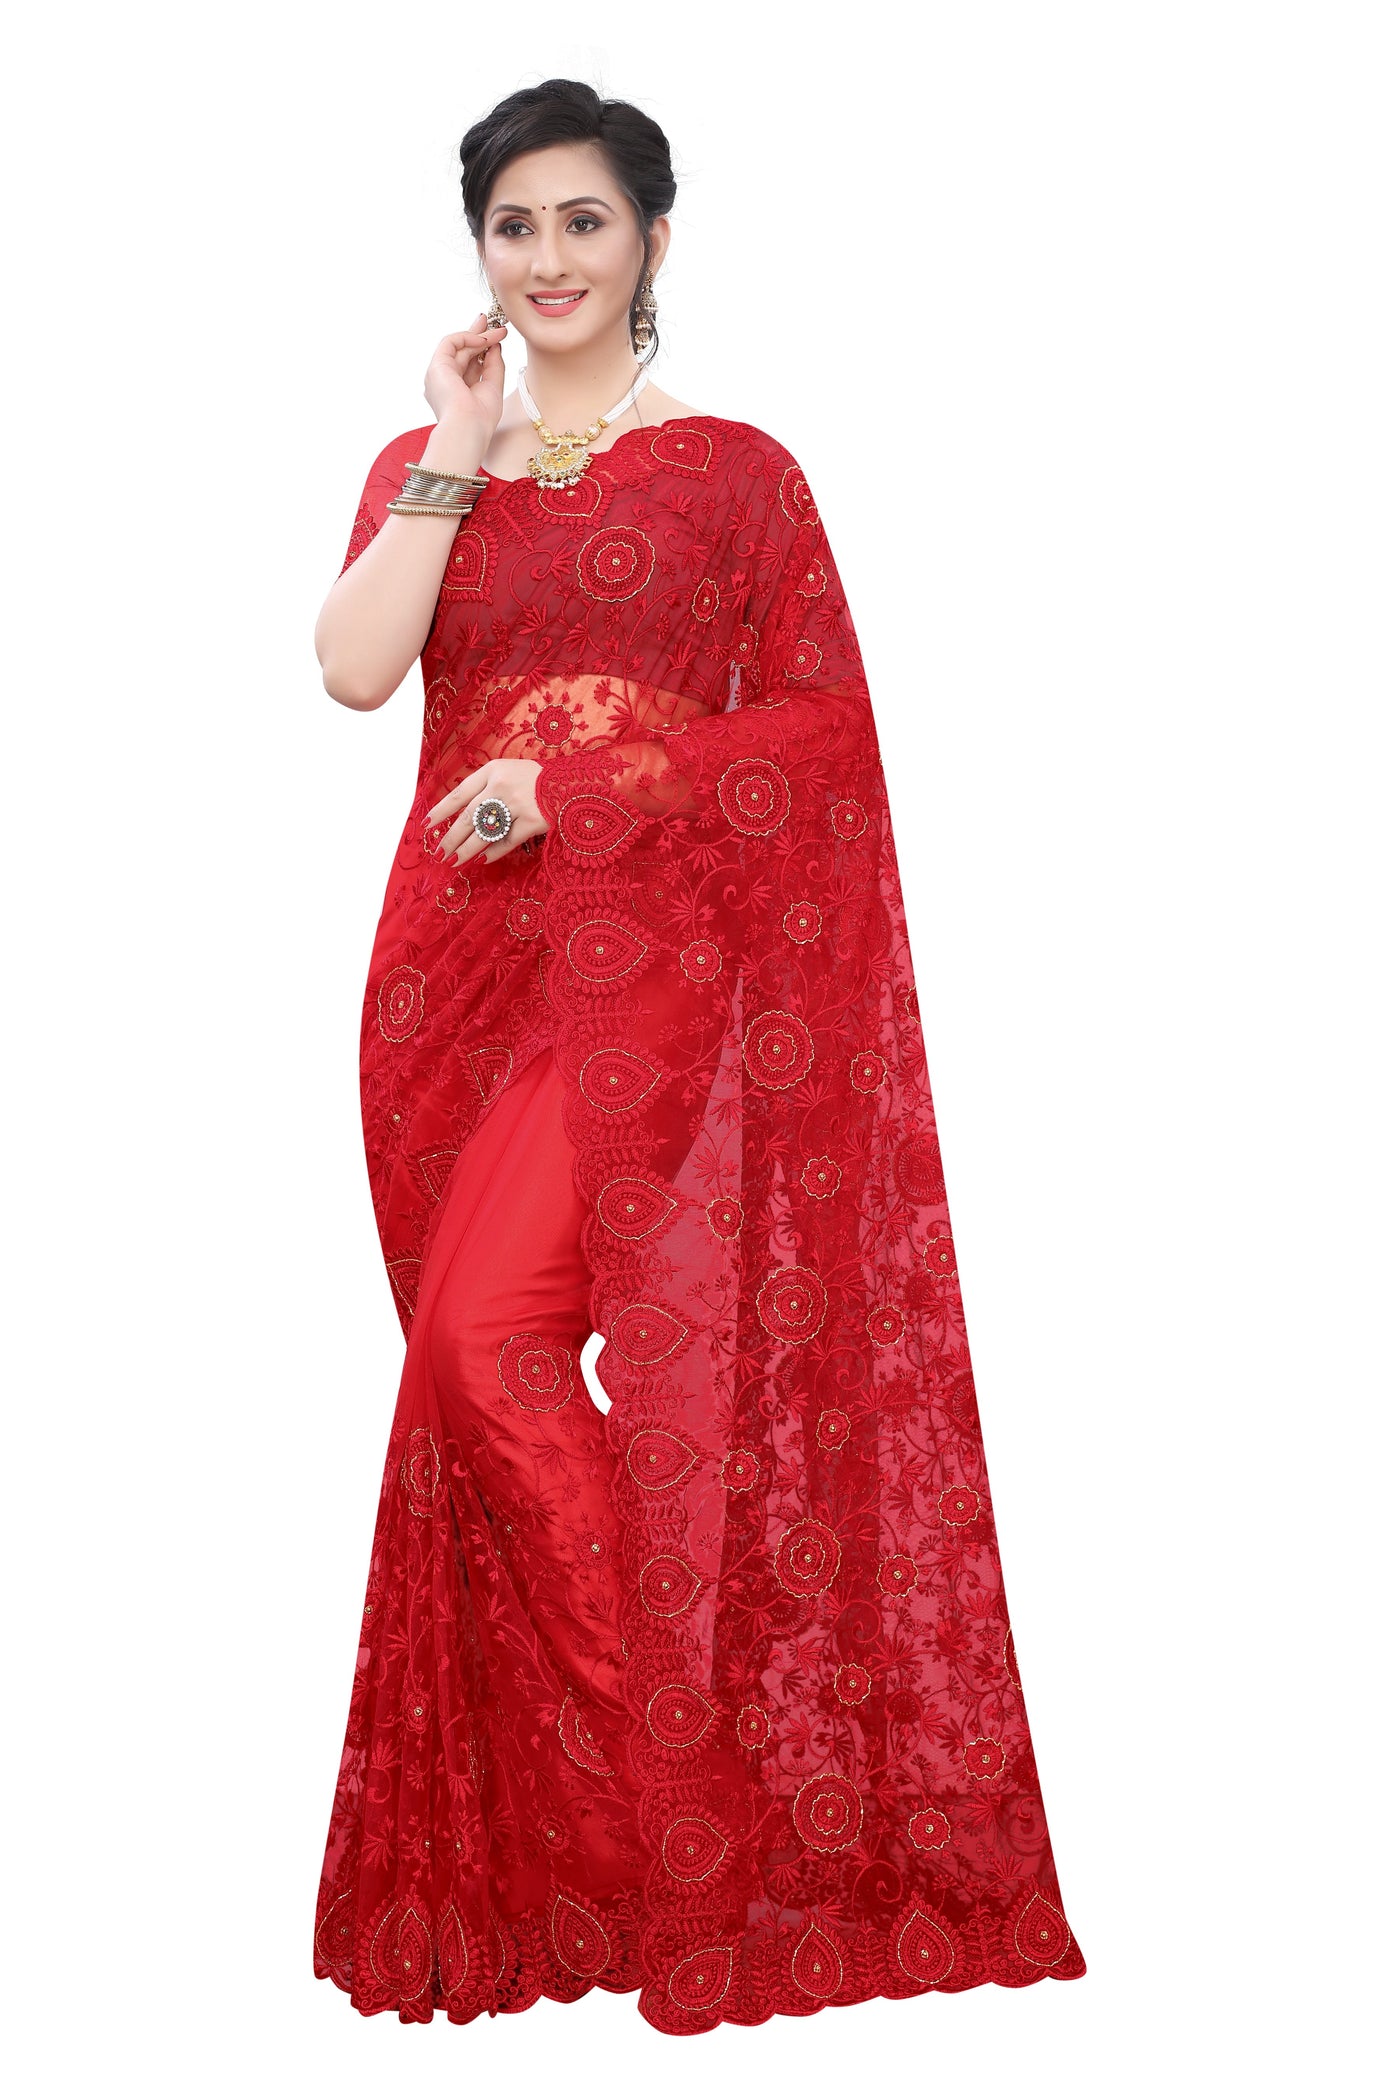 Net Red Saree With Blouse